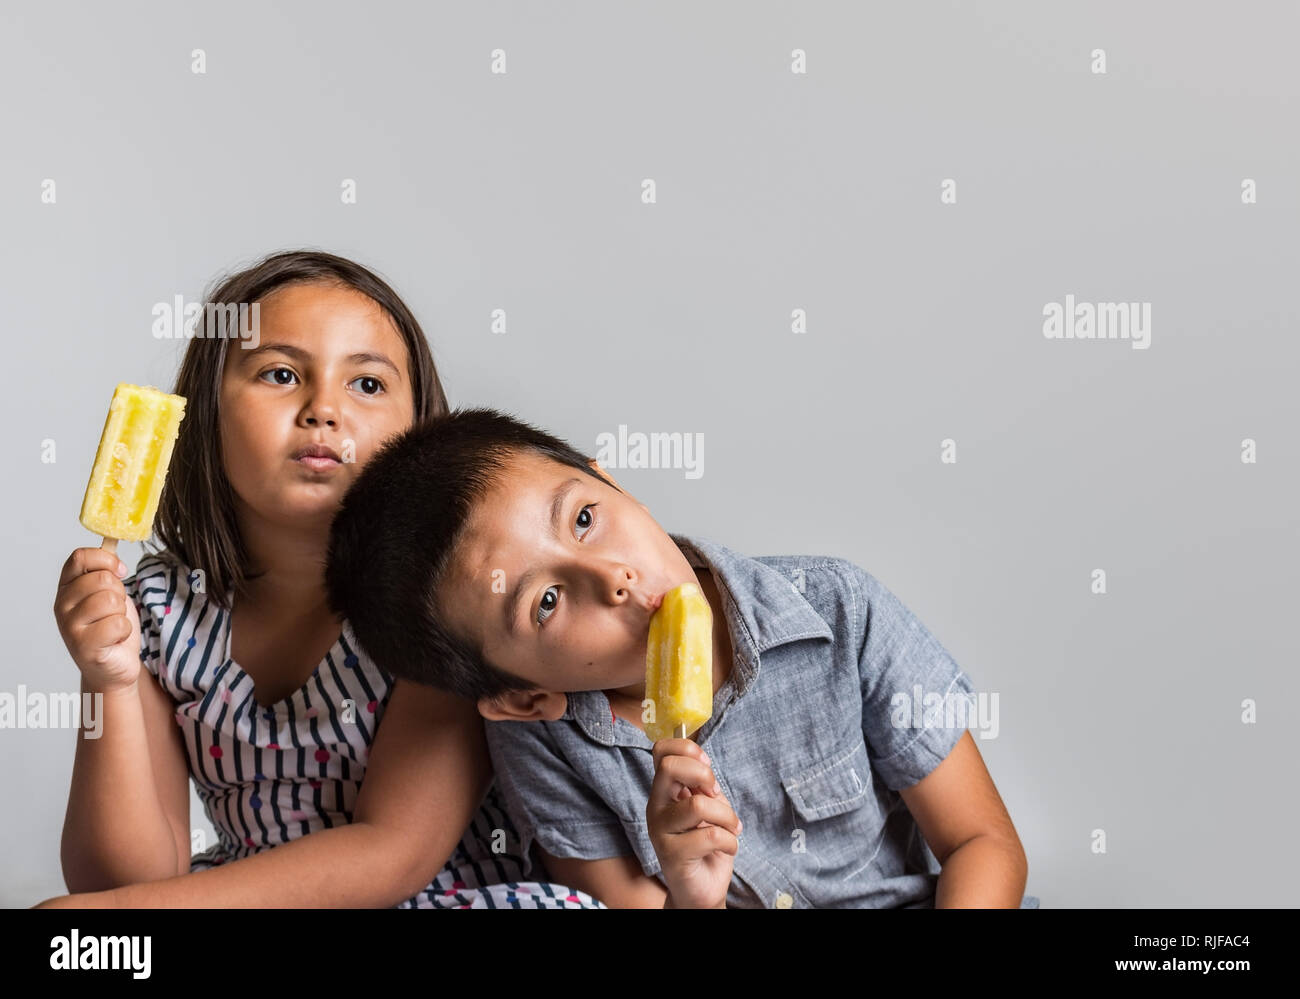 Young boy and girl with natural expression enjoying ice cream, studio image with copy space for text. Stock Photo